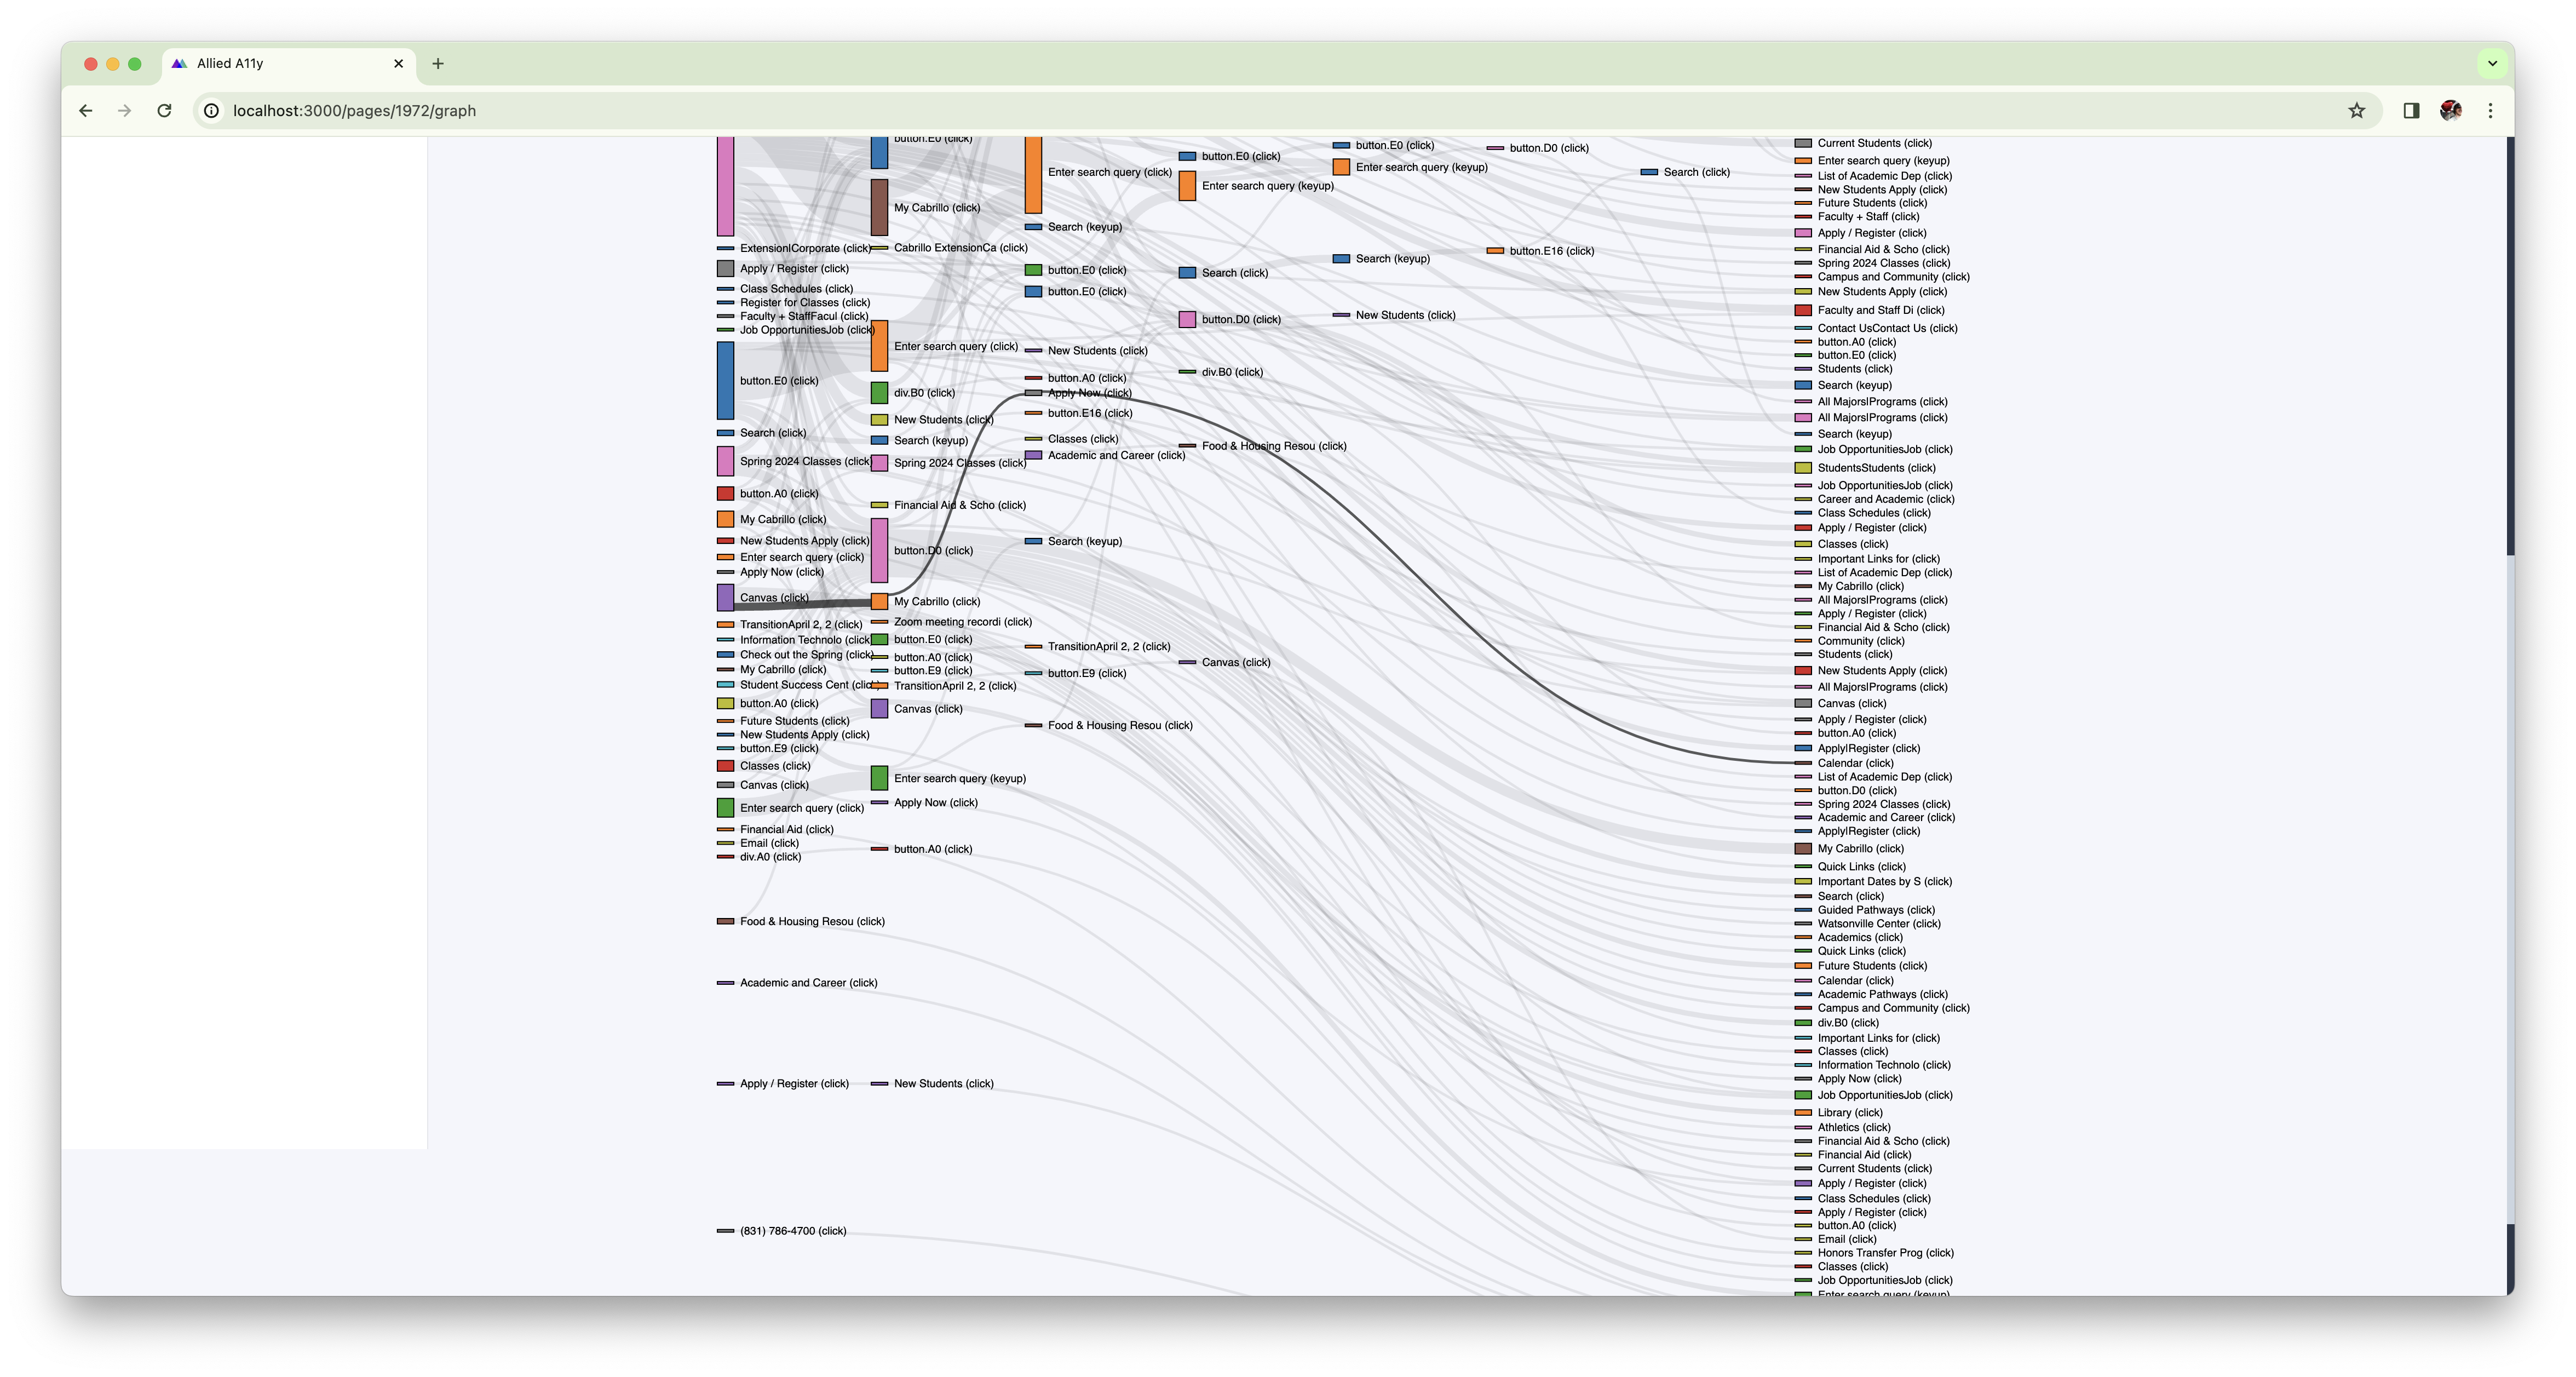 An interactive chart showing user journeys with controls for filtering and querying